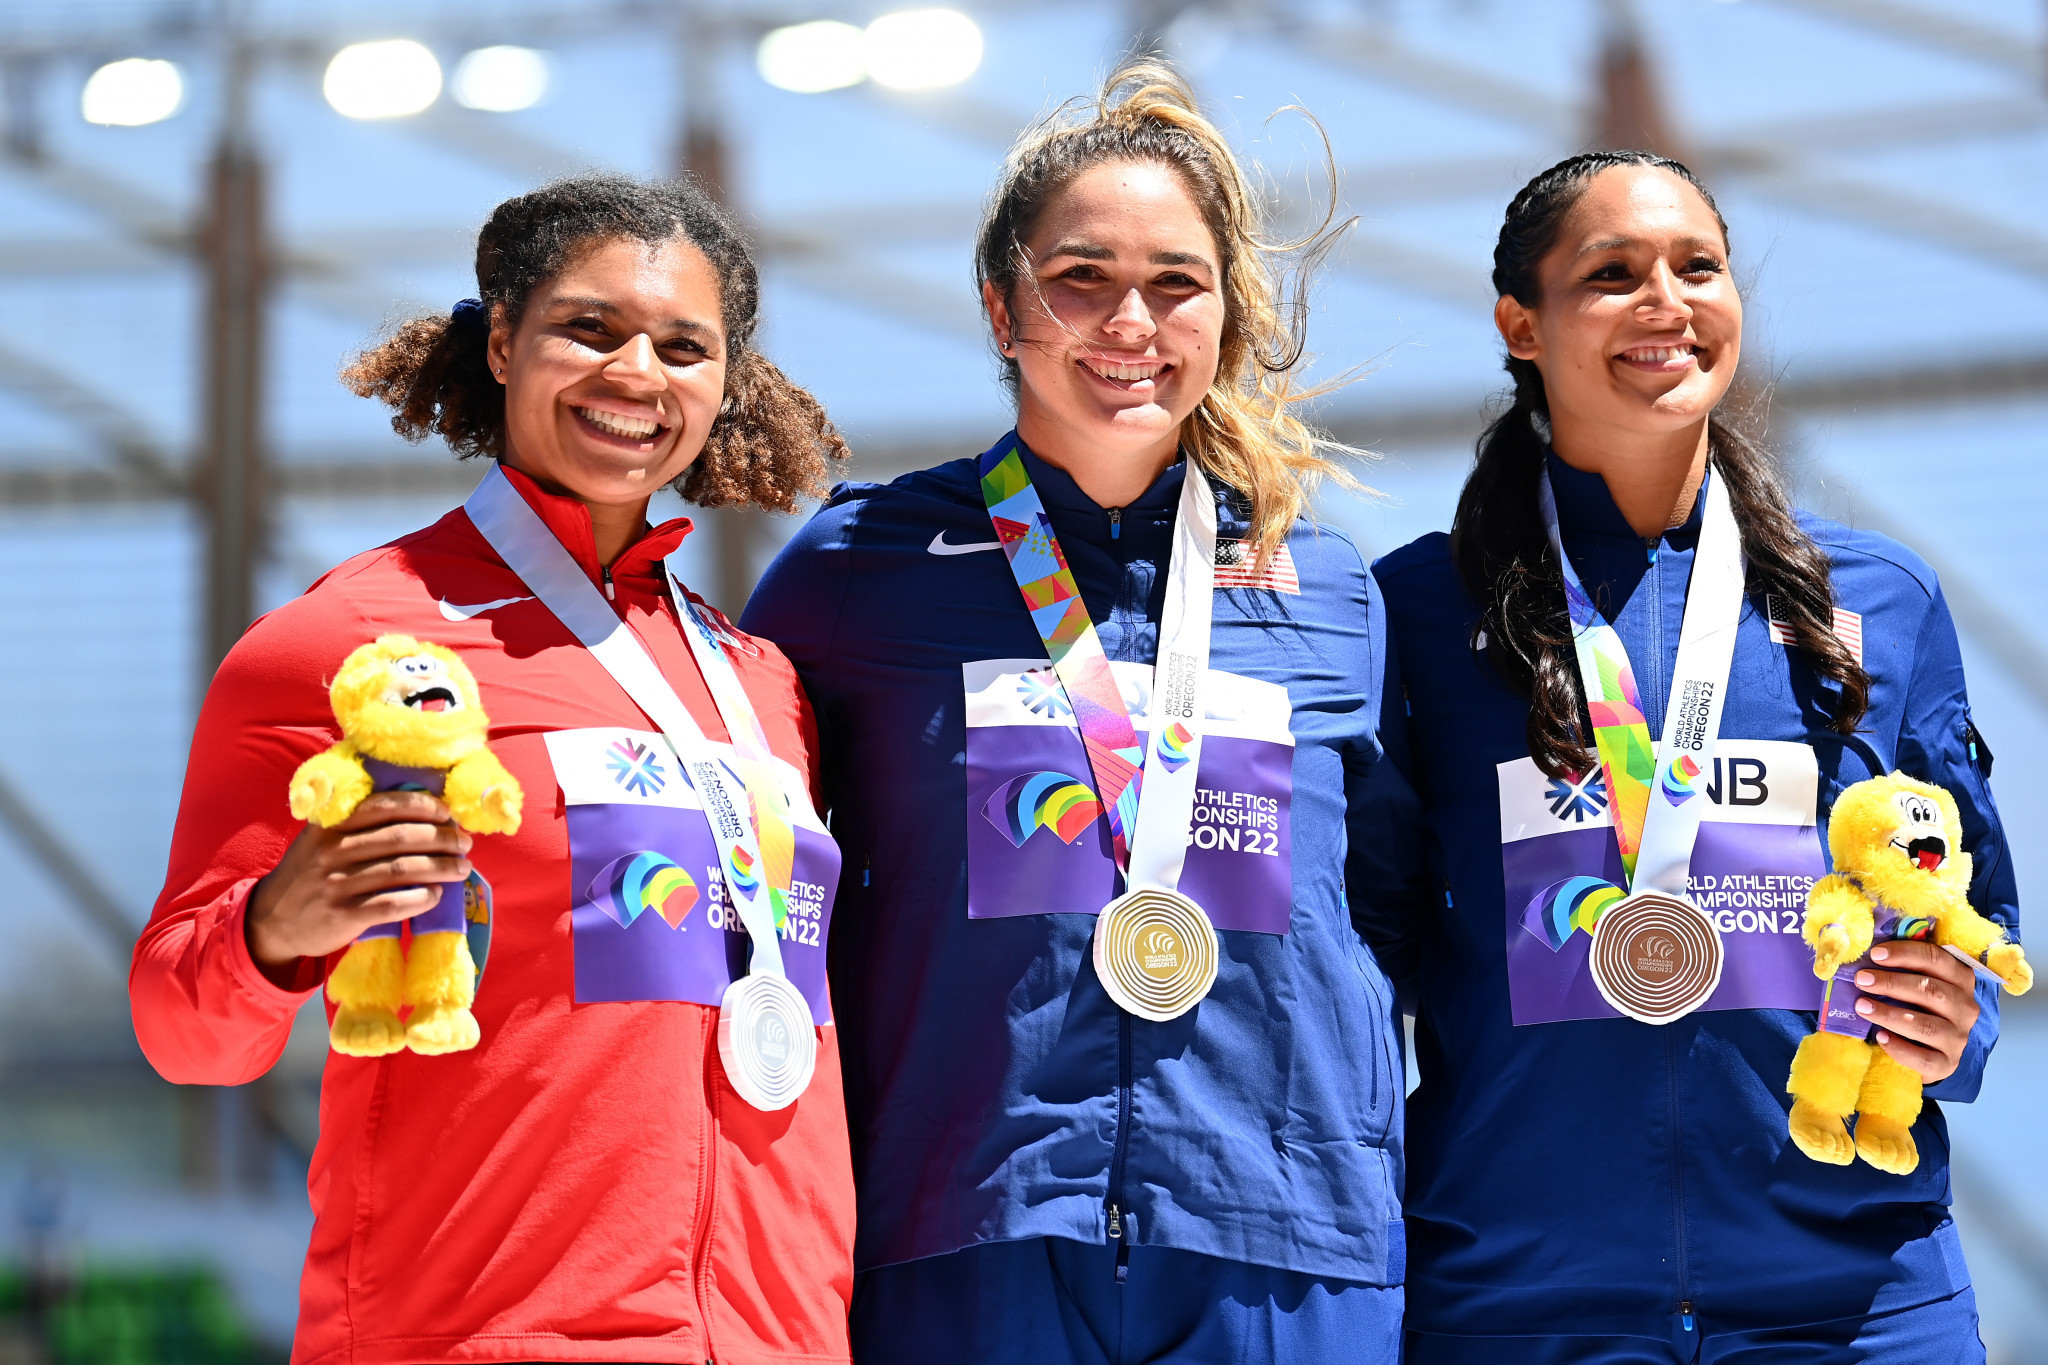 
Hammer throw silver medallist Camryn Rogers of Canada, gold medalist Brooke Andersen and bronze medallist Janee' Kassanavoid of the United States pose with their medals ©Getty Images